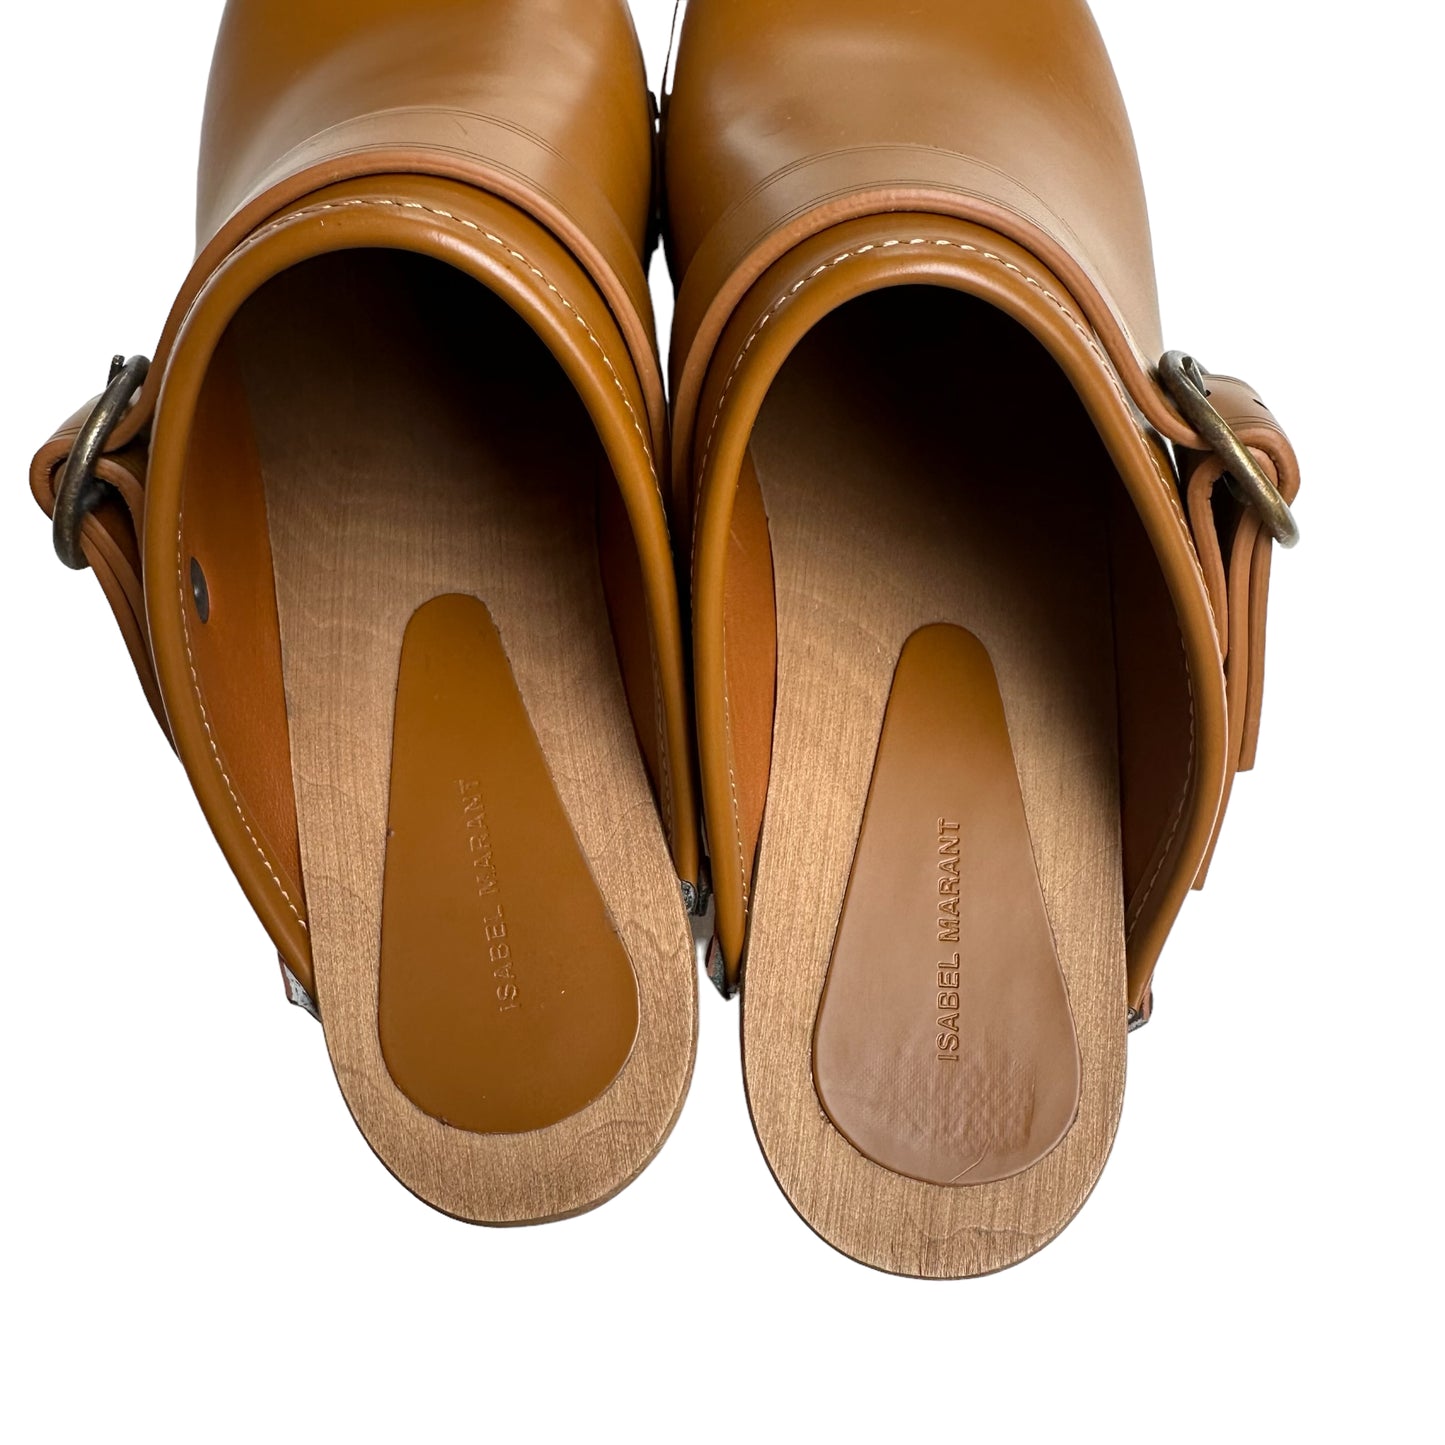 Brown Leather Clogs - 8